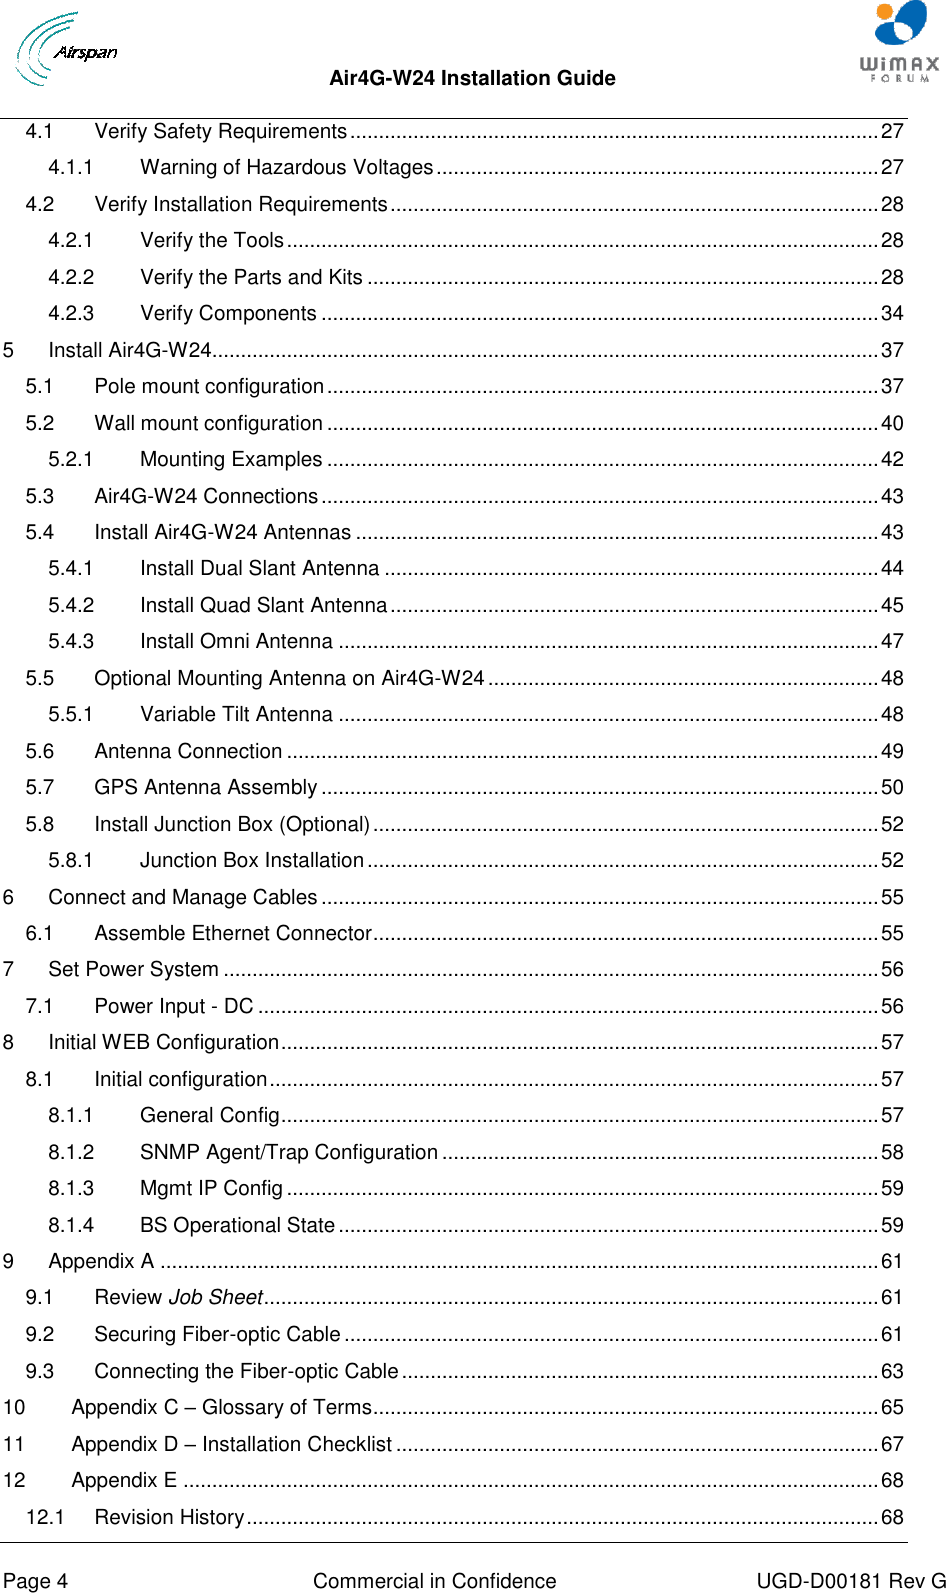  Air4G-W24 Installation Guide       Page 4  Commercial in Confidence  UGD-D00181 Rev G 4.1 Verify Safety Requirements ............................................................................................ 27 4.1.1 Warning of Hazardous Voltages ............................................................................. 27 4.2 Verify Installation Requirements ..................................................................................... 28 4.2.1 Verify the Tools ....................................................................................................... 28 4.2.2 Verify the Parts and Kits ......................................................................................... 28 4.2.3 Verify Components ................................................................................................. 34 5 Install Air4G-W24 .................................................................................................................... 37 5.1 Pole mount configuration ................................................................................................ 37 5.2 Wall mount configuration ................................................................................................ 40 5.2.1 Mounting Examples ................................................................................................ 42 5.3 Air4G-W24 Connections ................................................................................................. 43 5.4 Install Air4G-W24 Antennas ........................................................................................... 43 5.4.1 Install Dual Slant Antenna ...................................................................................... 44 5.4.2 Install Quad Slant Antenna ..................................................................................... 45 5.4.3 Install Omni Antenna .............................................................................................. 47 5.5 Optional Mounting Antenna on Air4G-W24 .................................................................... 48 5.5.1 Variable Tilt Antenna .............................................................................................. 48 5.6 Antenna Connection ....................................................................................................... 49 5.7 GPS Antenna Assembly ................................................................................................. 50 5.8 Install Junction Box (Optional) ........................................................................................ 52 5.8.1 Junction Box Installation ......................................................................................... 52 6 Connect and Manage Cables ................................................................................................. 55 6.1 Assemble Ethernet Connector ........................................................................................ 55 7 Set Power System .................................................................................................................. 56 7.1 Power Input - DC ............................................................................................................ 56 8 Initial WEB Configuration ........................................................................................................ 57 8.1 Initial configuration .......................................................................................................... 57 8.1.1 General Config ........................................................................................................ 57 8.1.2 SNMP Agent/Trap Configuration ............................................................................ 58 8.1.3 Mgmt IP Config ....................................................................................................... 59 8.1.4 BS Operational State .............................................................................................. 59 9 Appendix A ............................................................................................................................. 61 9.1 Review Job Sheet ........................................................................................................... 61 9.2 Securing Fiber-optic Cable ............................................................................................. 61 9.3 Connecting the Fiber-optic Cable ................................................................................... 63 10 Appendix C – Glossary of Terms ........................................................................................ 65 11 Appendix D – Installation Checklist .................................................................................... 67 12 Appendix E ......................................................................................................................... 68 12.1 Revision History .............................................................................................................. 68 